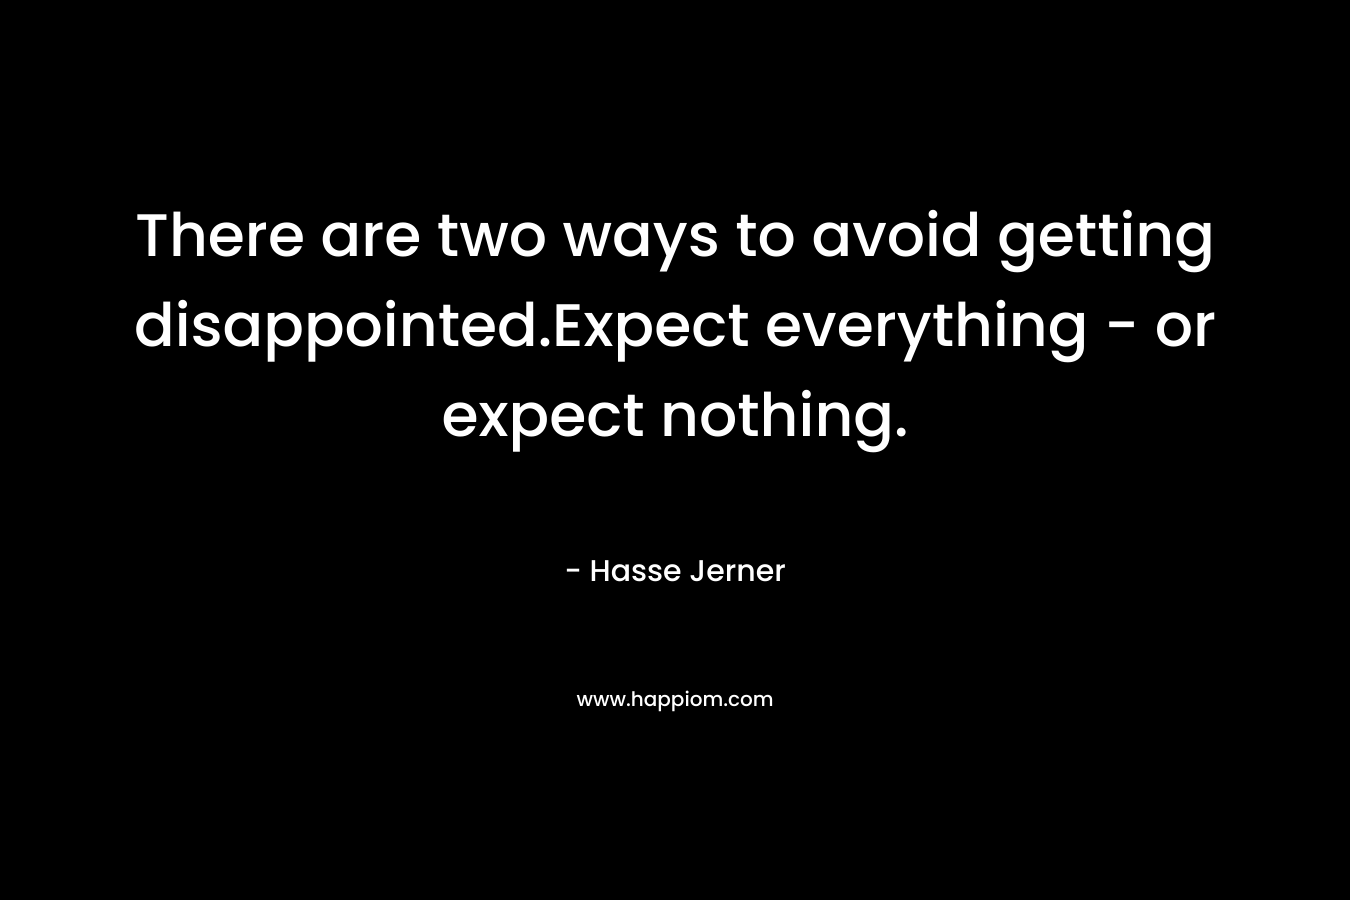 There are two ways to avoid getting disappointed.Expect everything - or expect nothing.